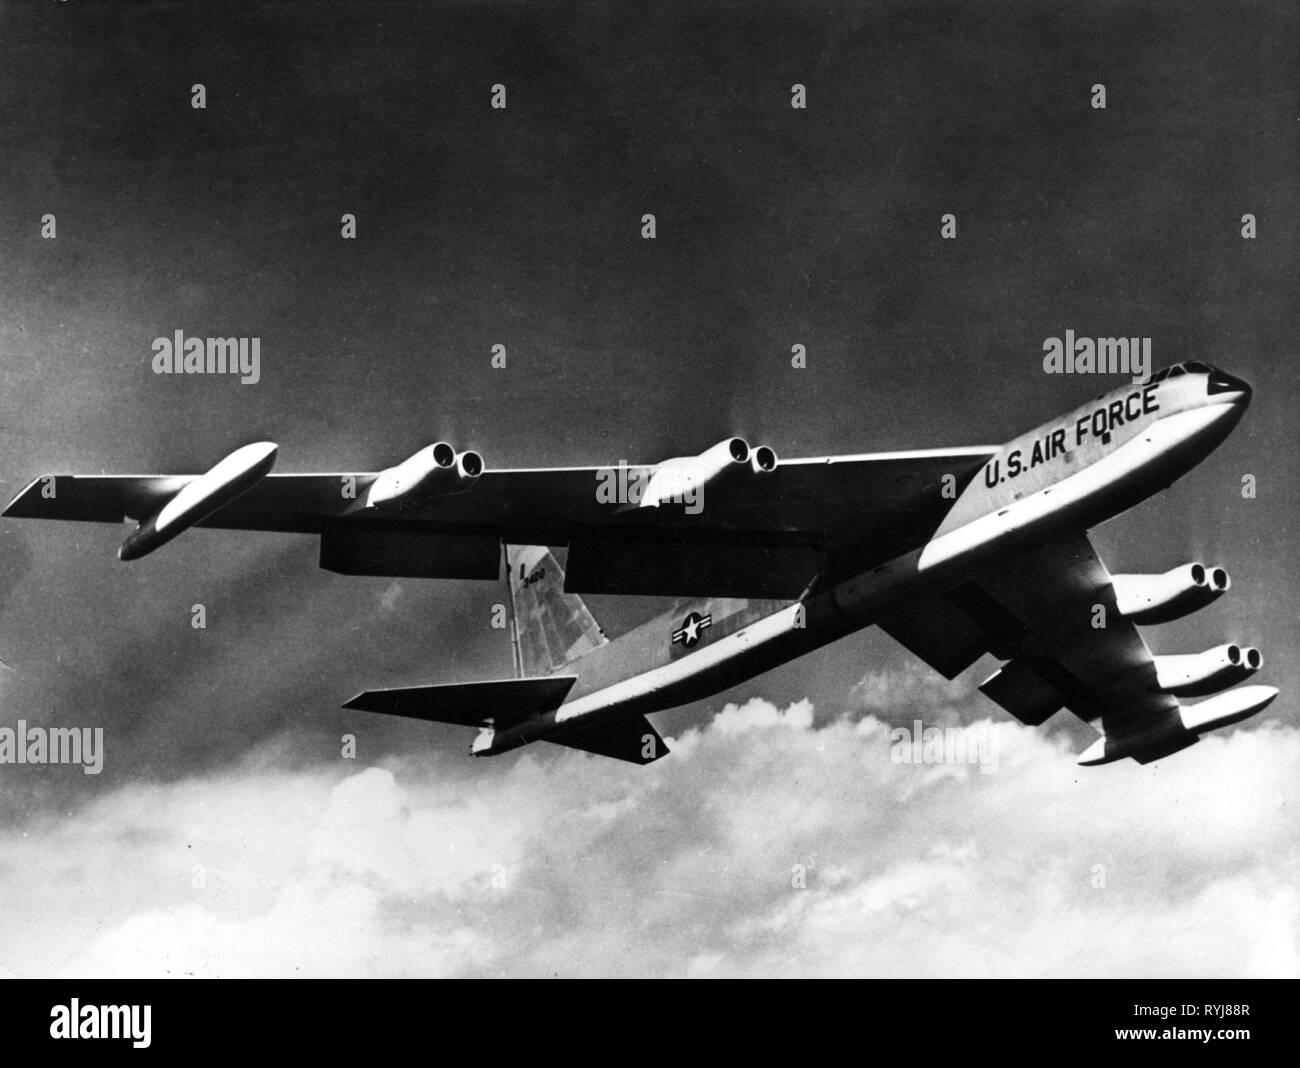 aeroplane, military, USA, Air Force, Strategic Air Command, nuclear bomber Boeing B-52 'Stratofortress' in the air, 1950s, Additional-Rights-Clearance-Info-Not-Available Stock Photo